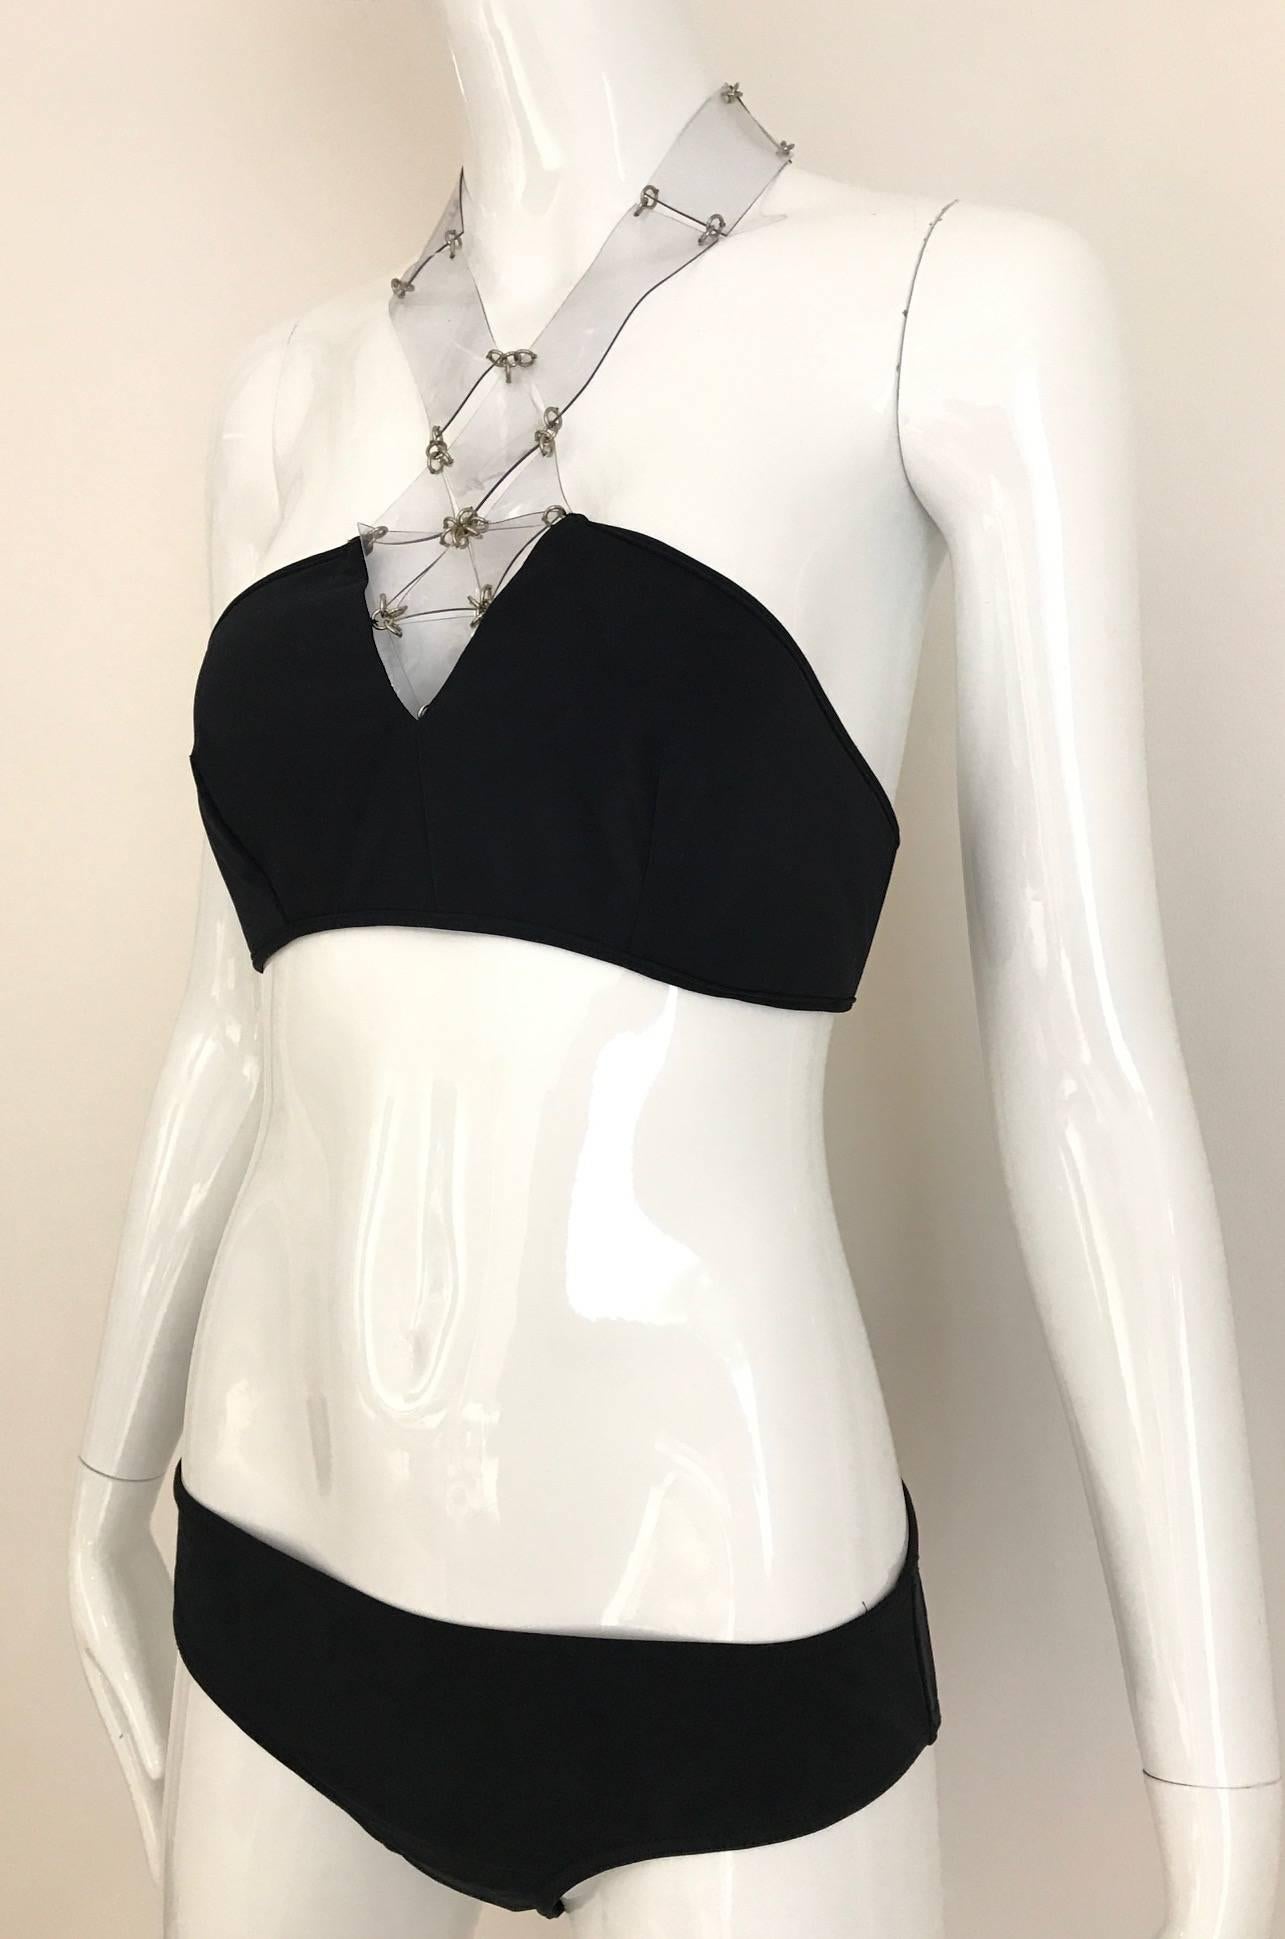 Unworn Paco Rabanne Black Halter Bikini top with clear plastic cut out.
Fit Size 4
Bust: 32 inch to  34 inch bust 
Bikini size: 34 inch 